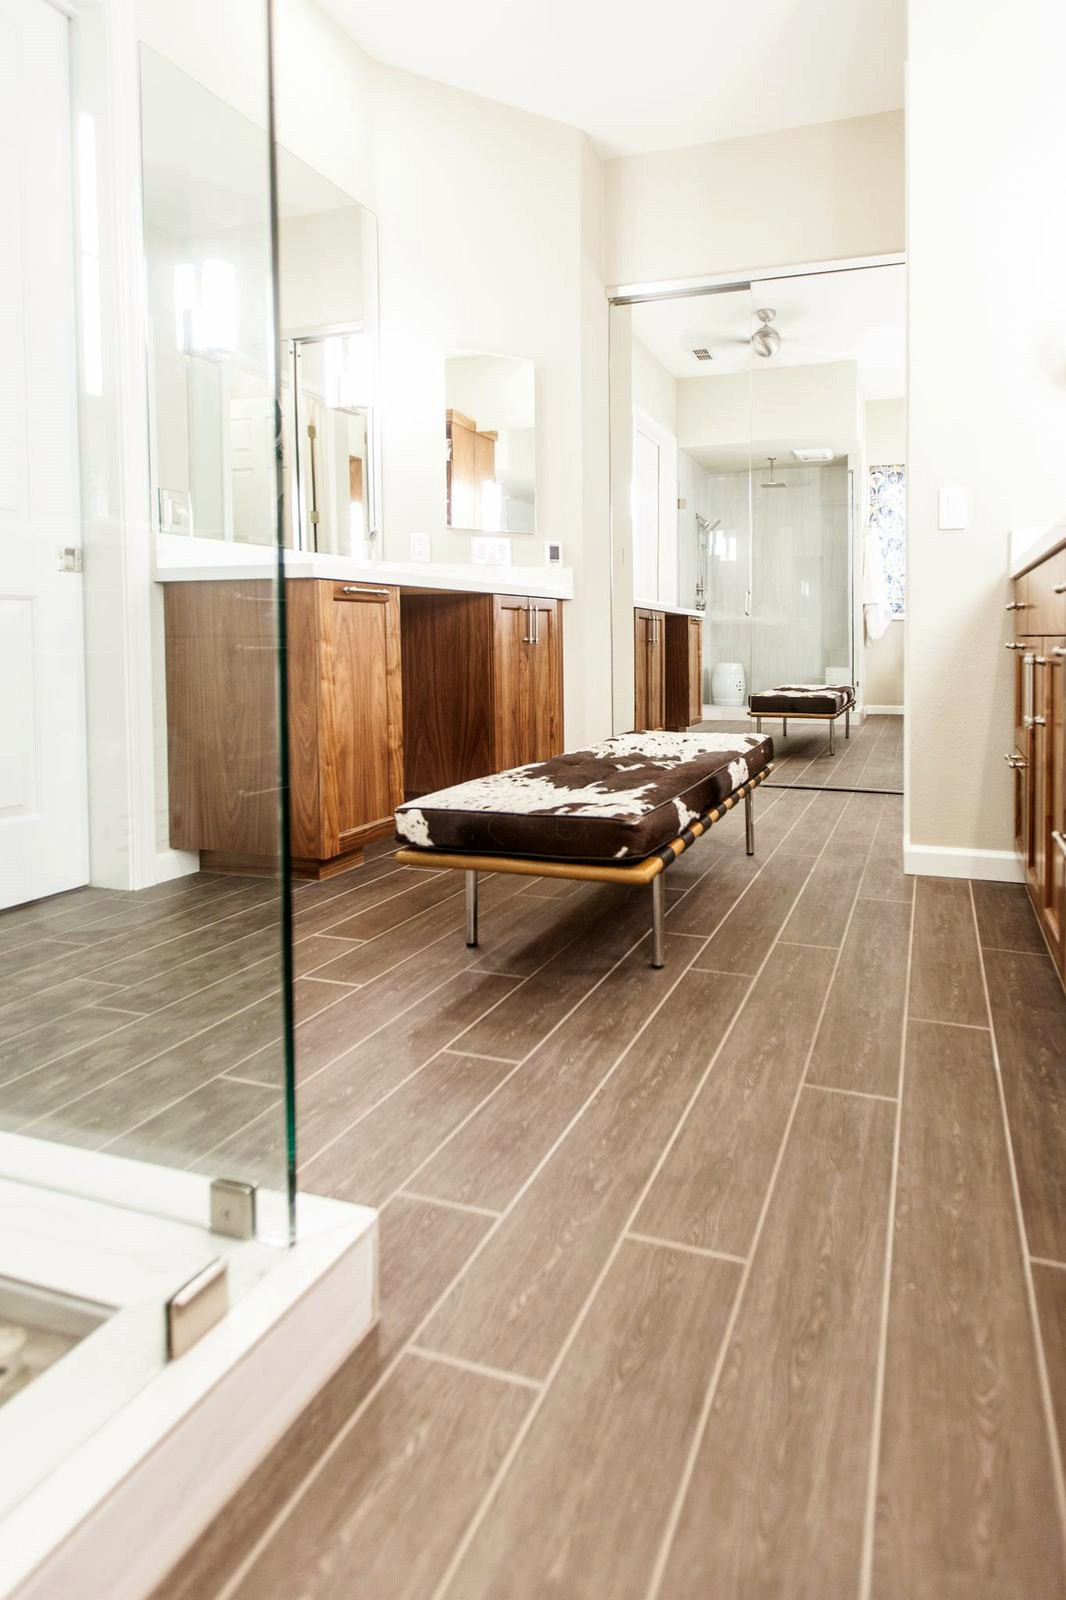 Wood Look Tile Bathroom Floor
 Wood Look Tile Why It Continues to Be a Trendsetter